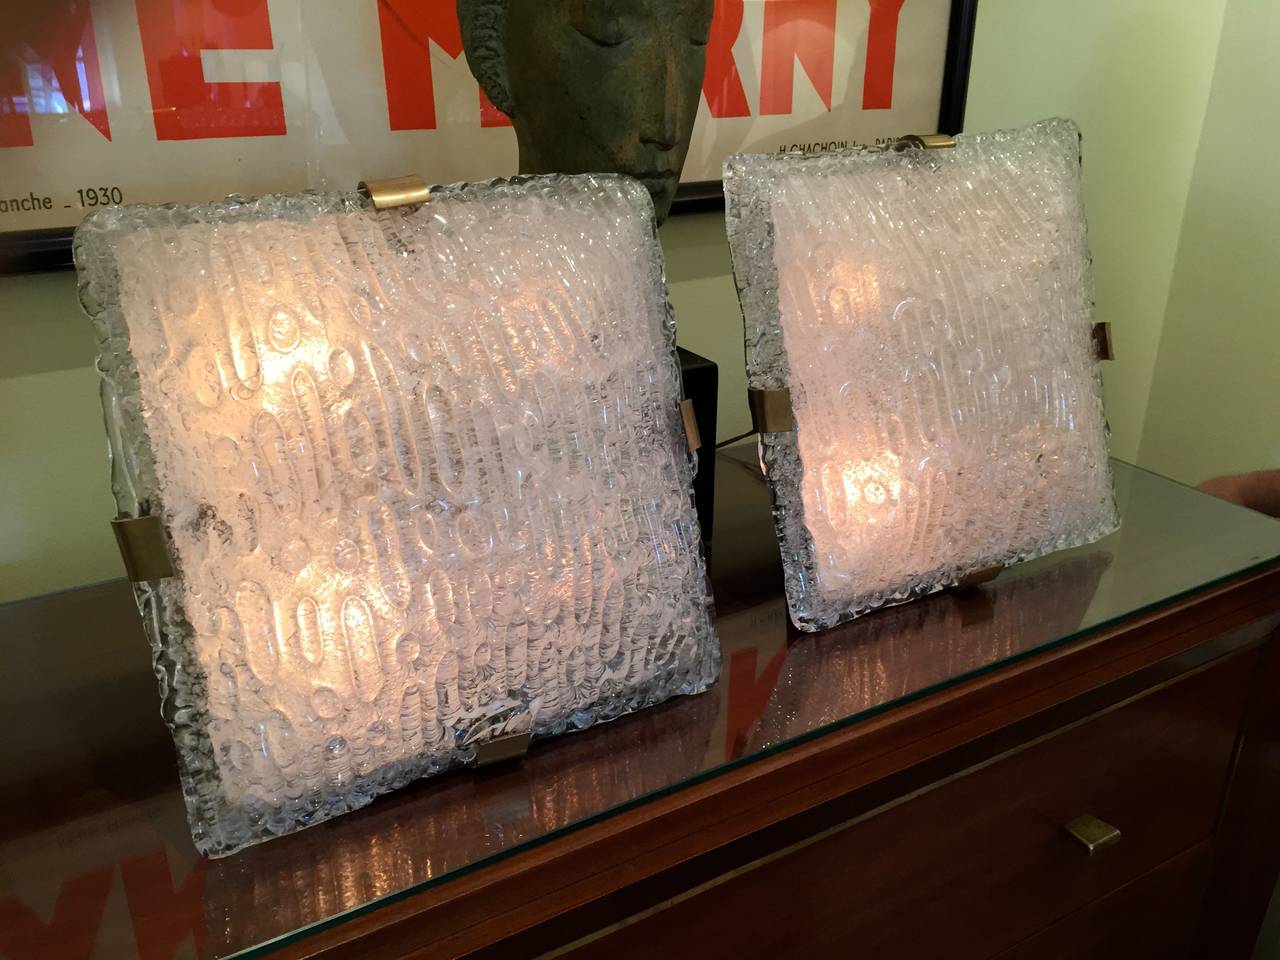 Pair of Handblown Glass Wall Lights by Mazzega In Excellent Condition For Sale In Quogue, NY